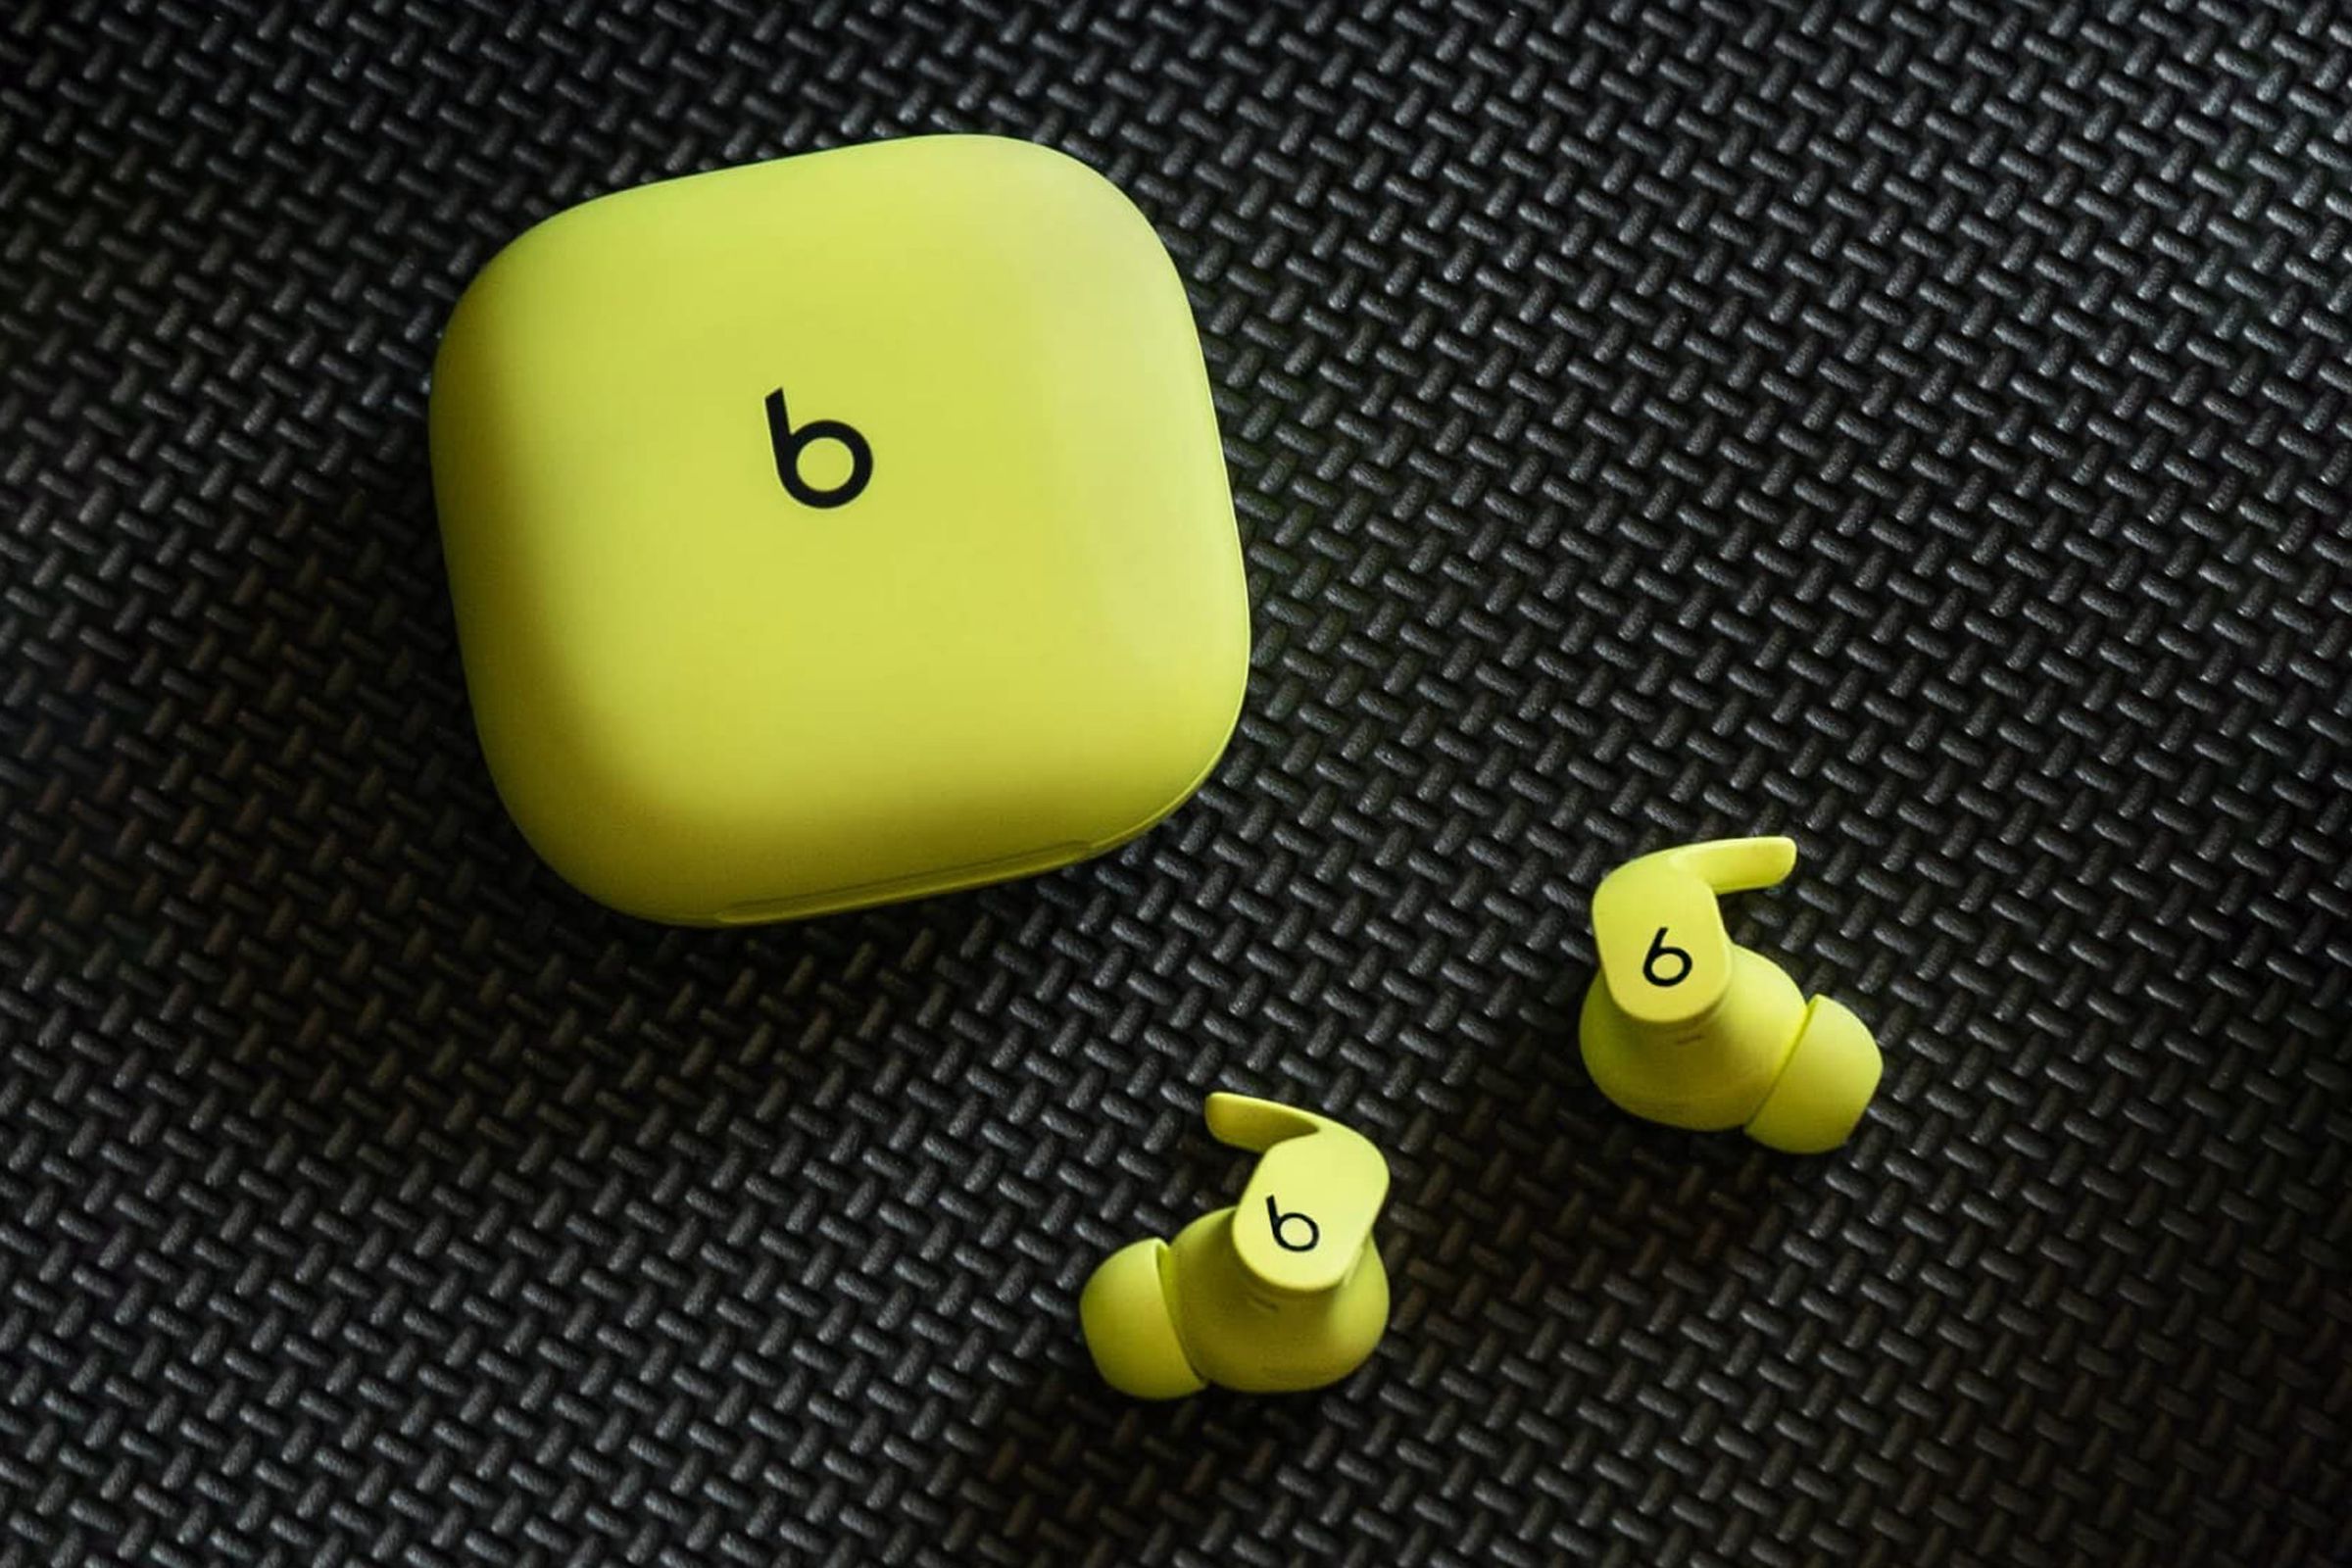 The bright yellow version of the Beats Fit Pro earbuds and their matching case resting on a black mesh pattern.